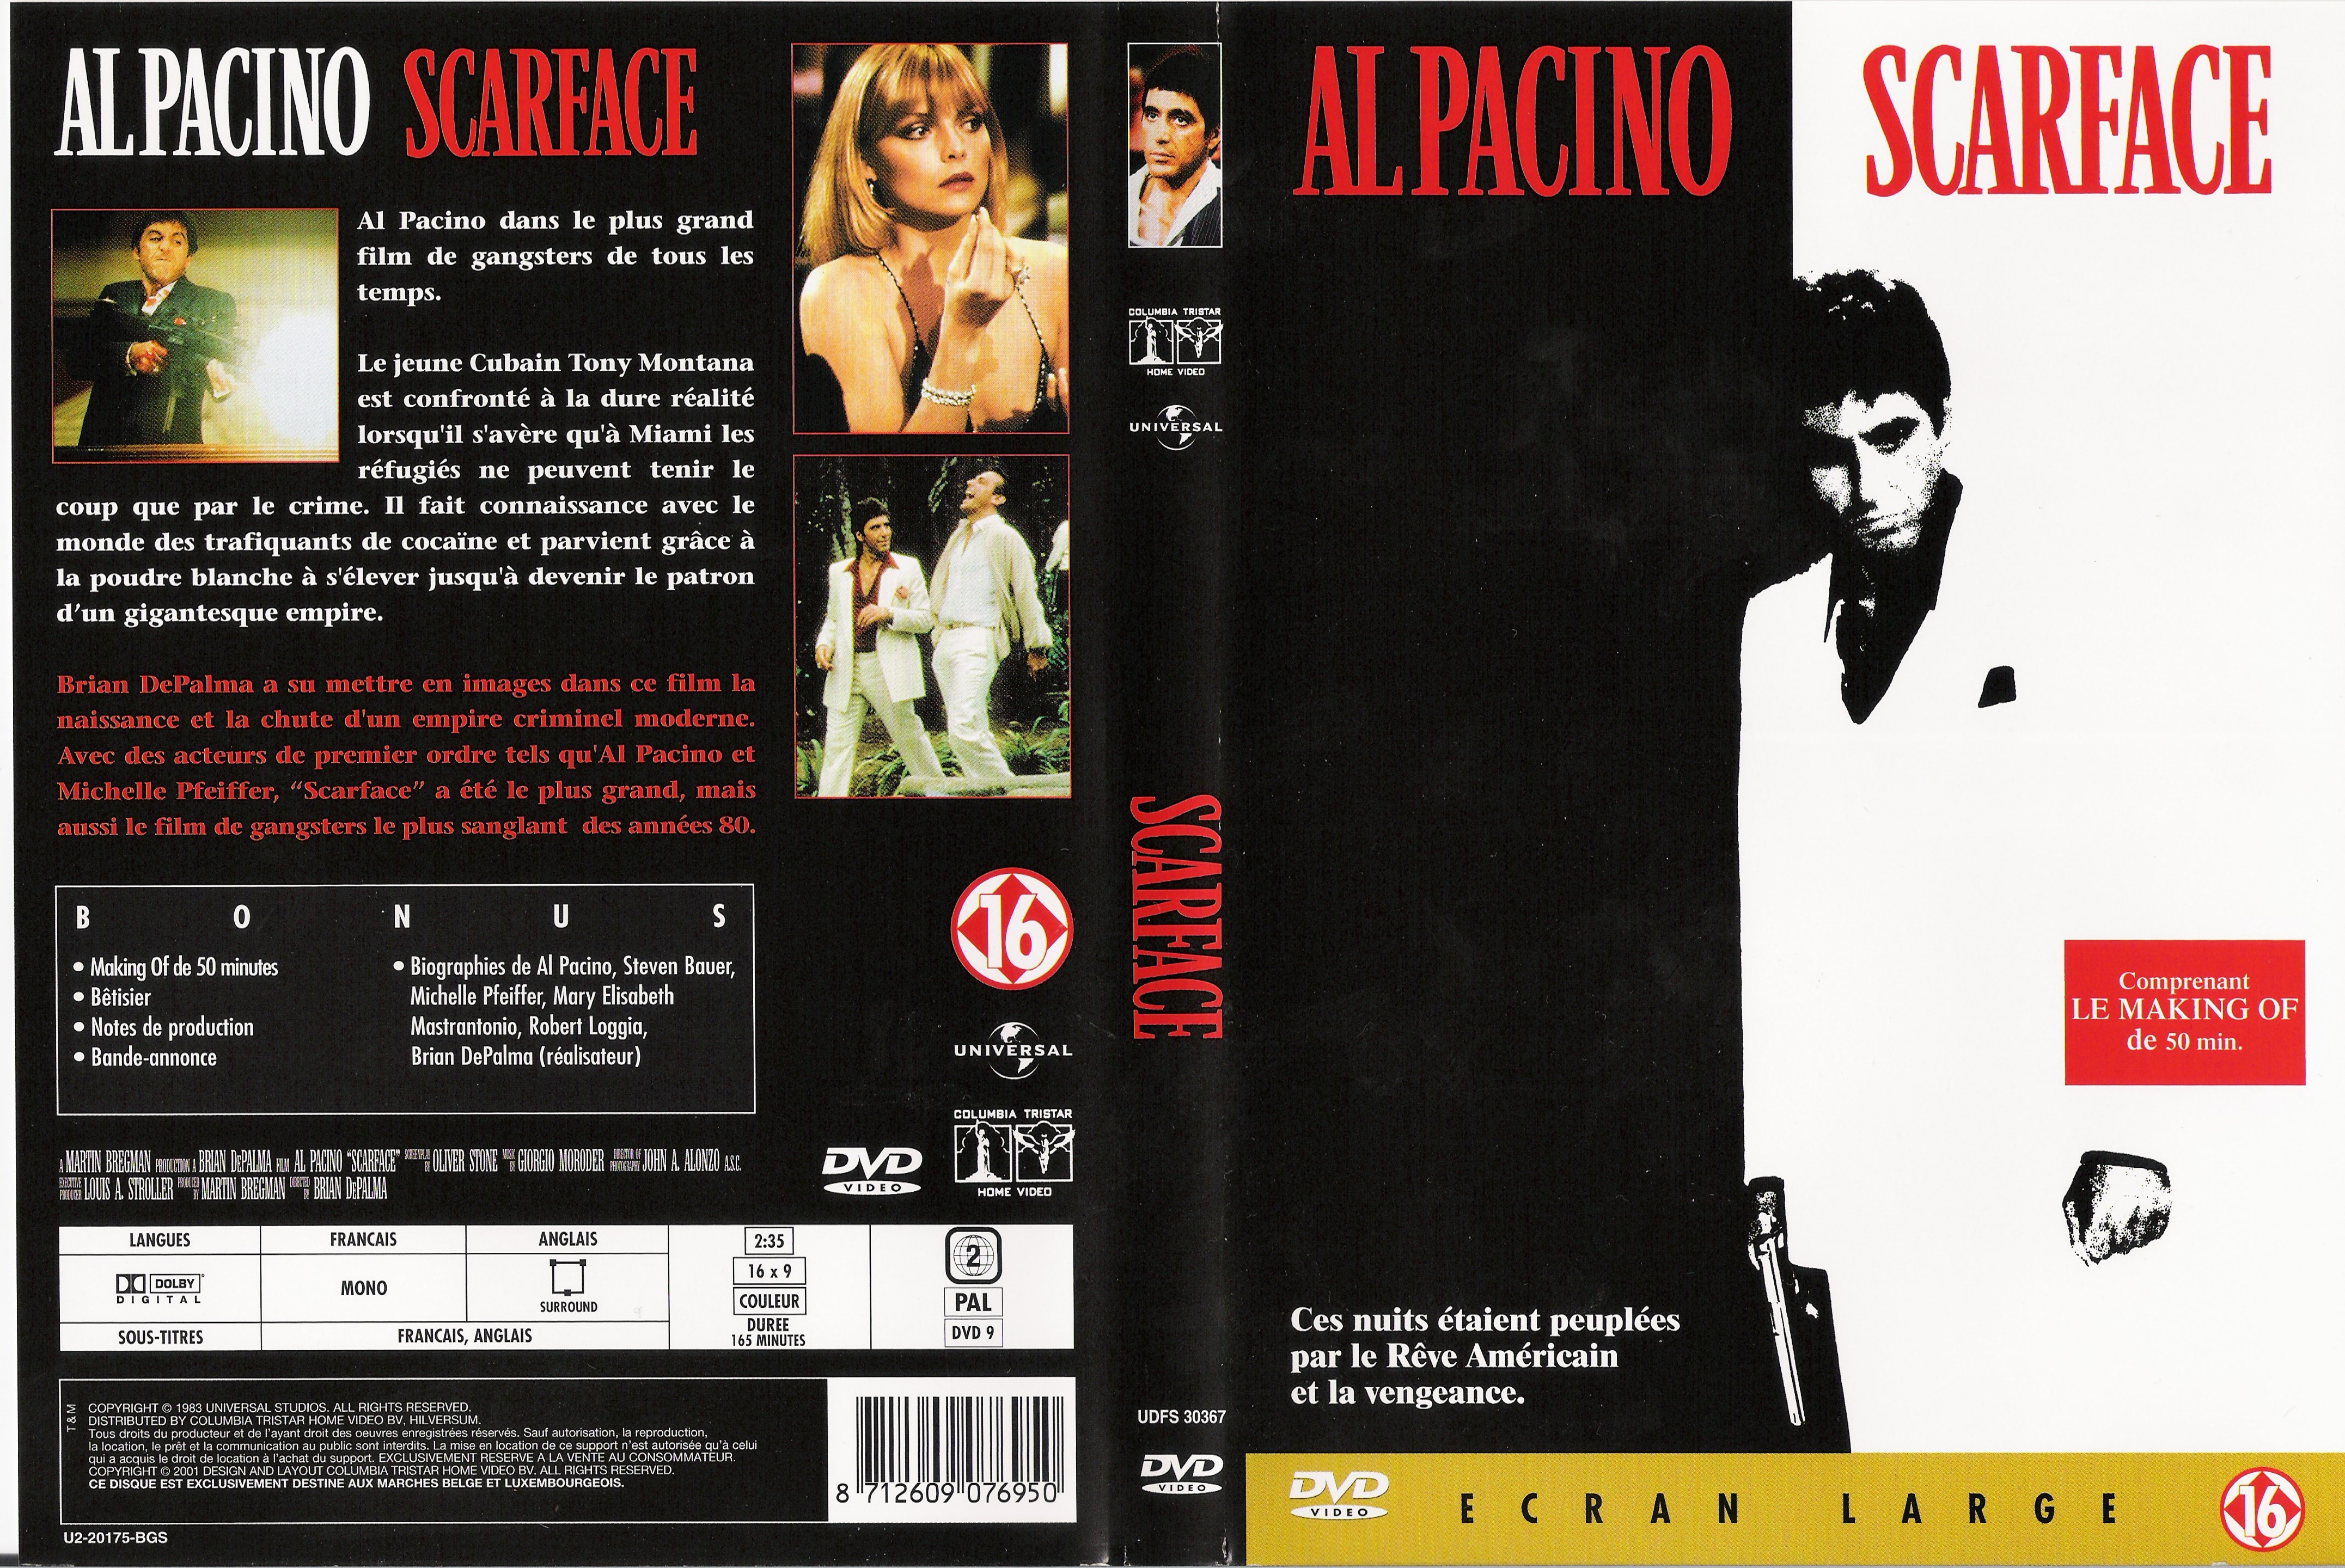 Jaquette DVD Scarface v3